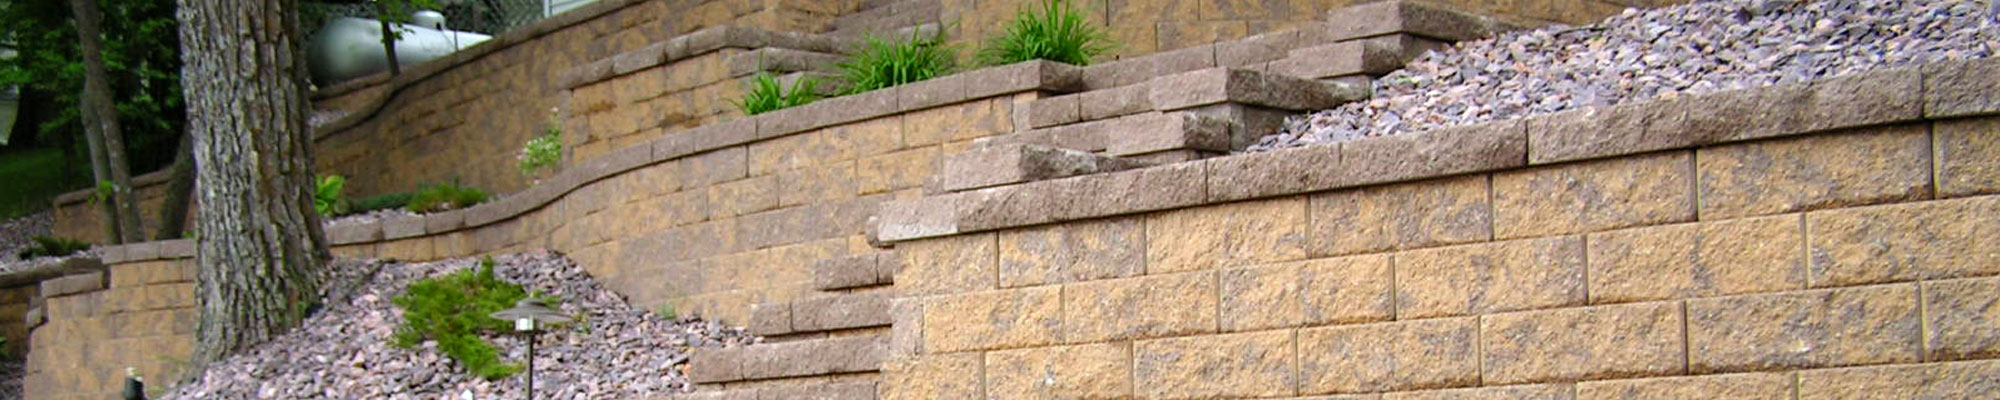 Multi-tiered block retaining wall designed and installed by Exterior Designs of Alexandria